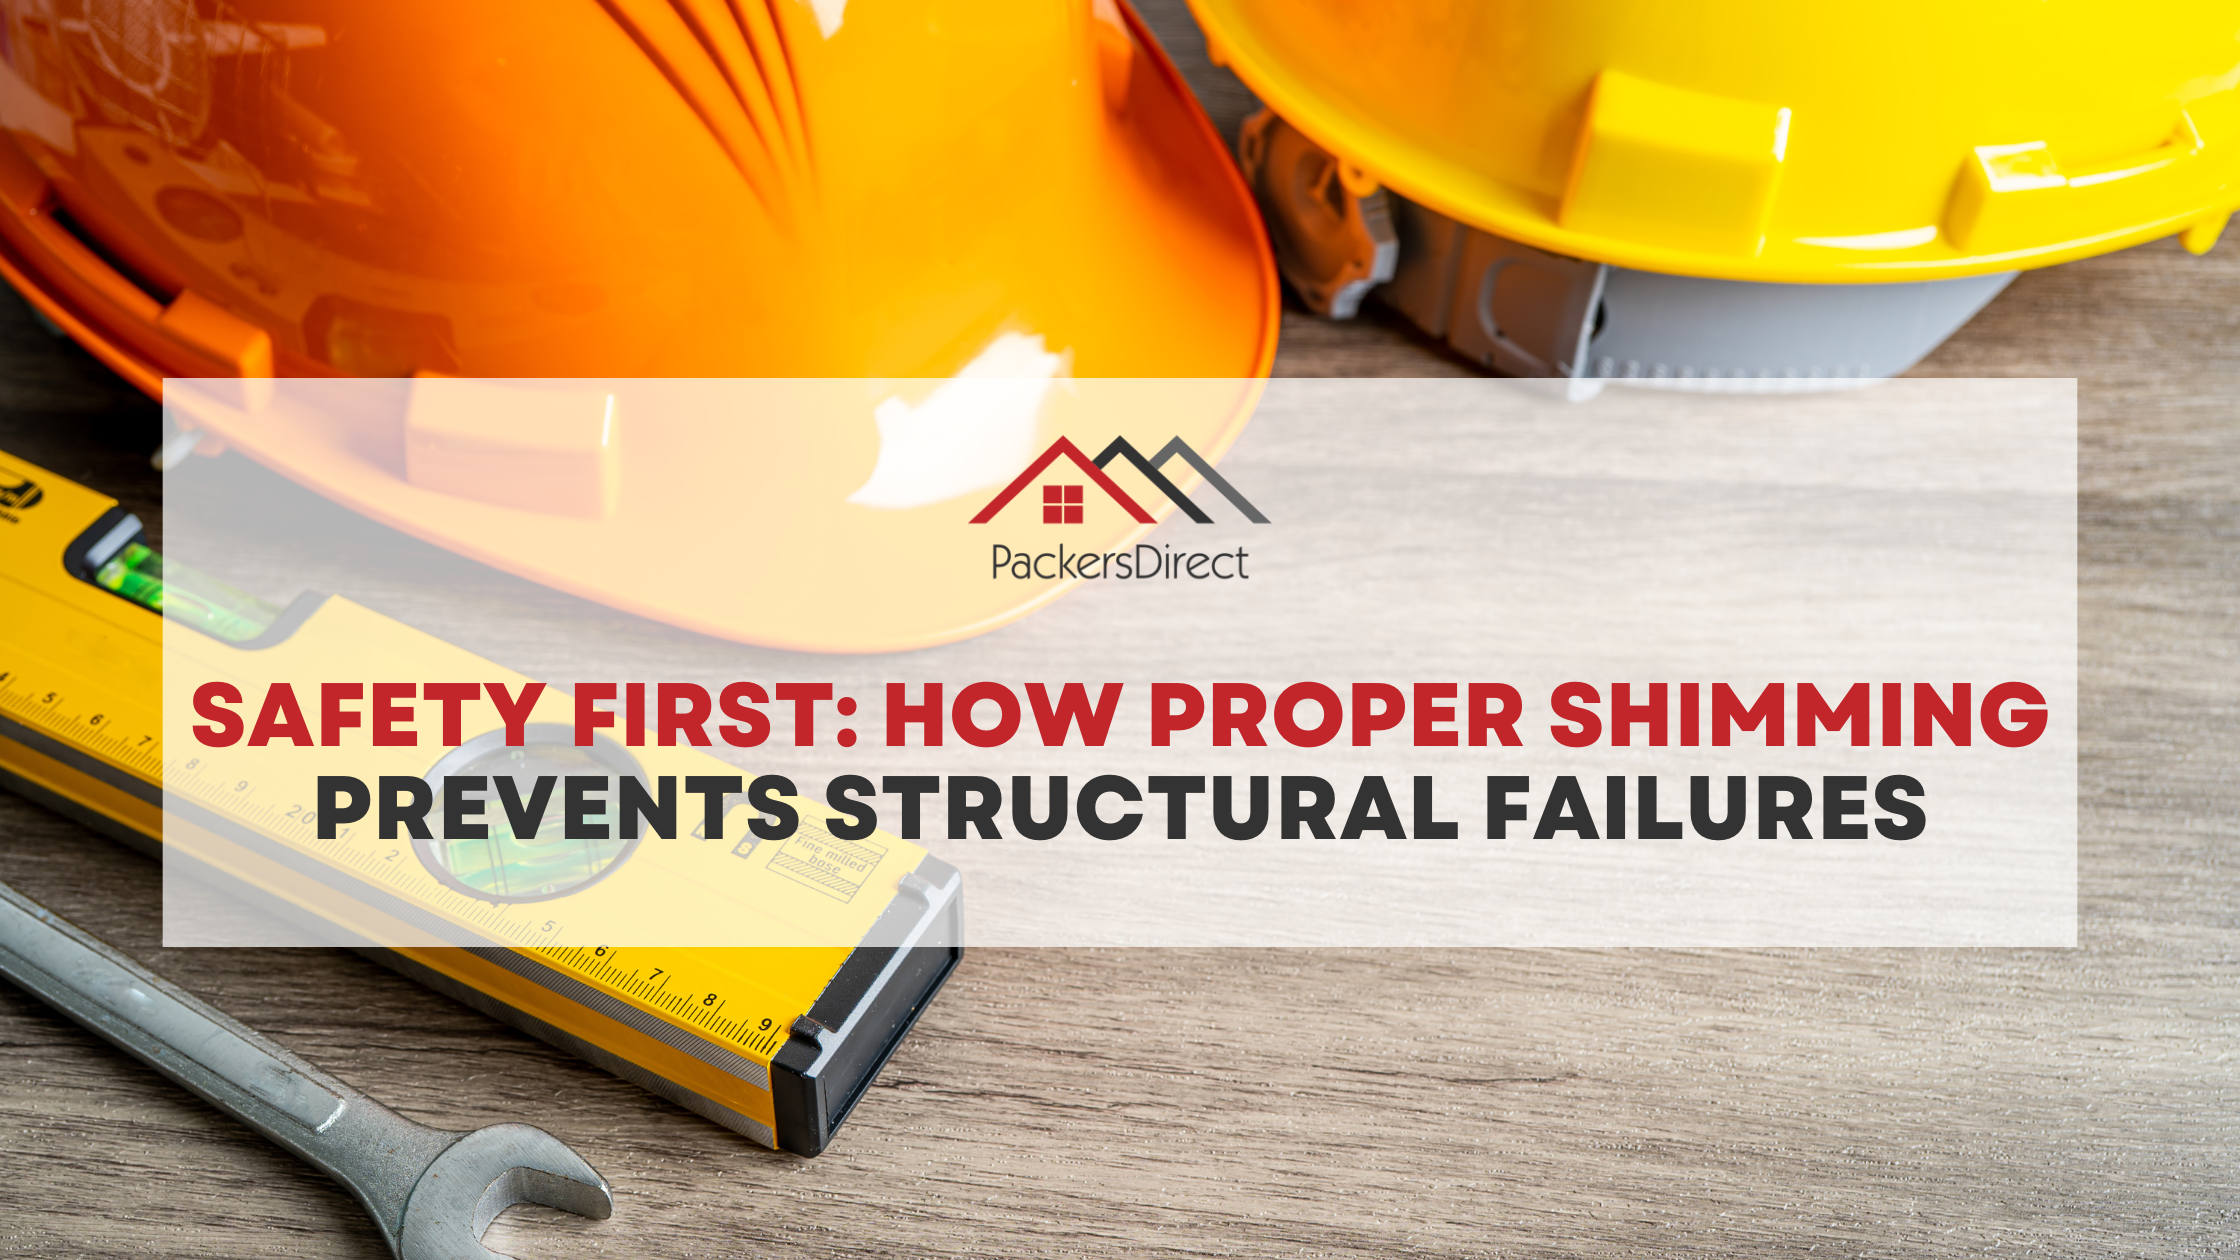 Safety First: How Proper Shimming Prevents Structural Failures